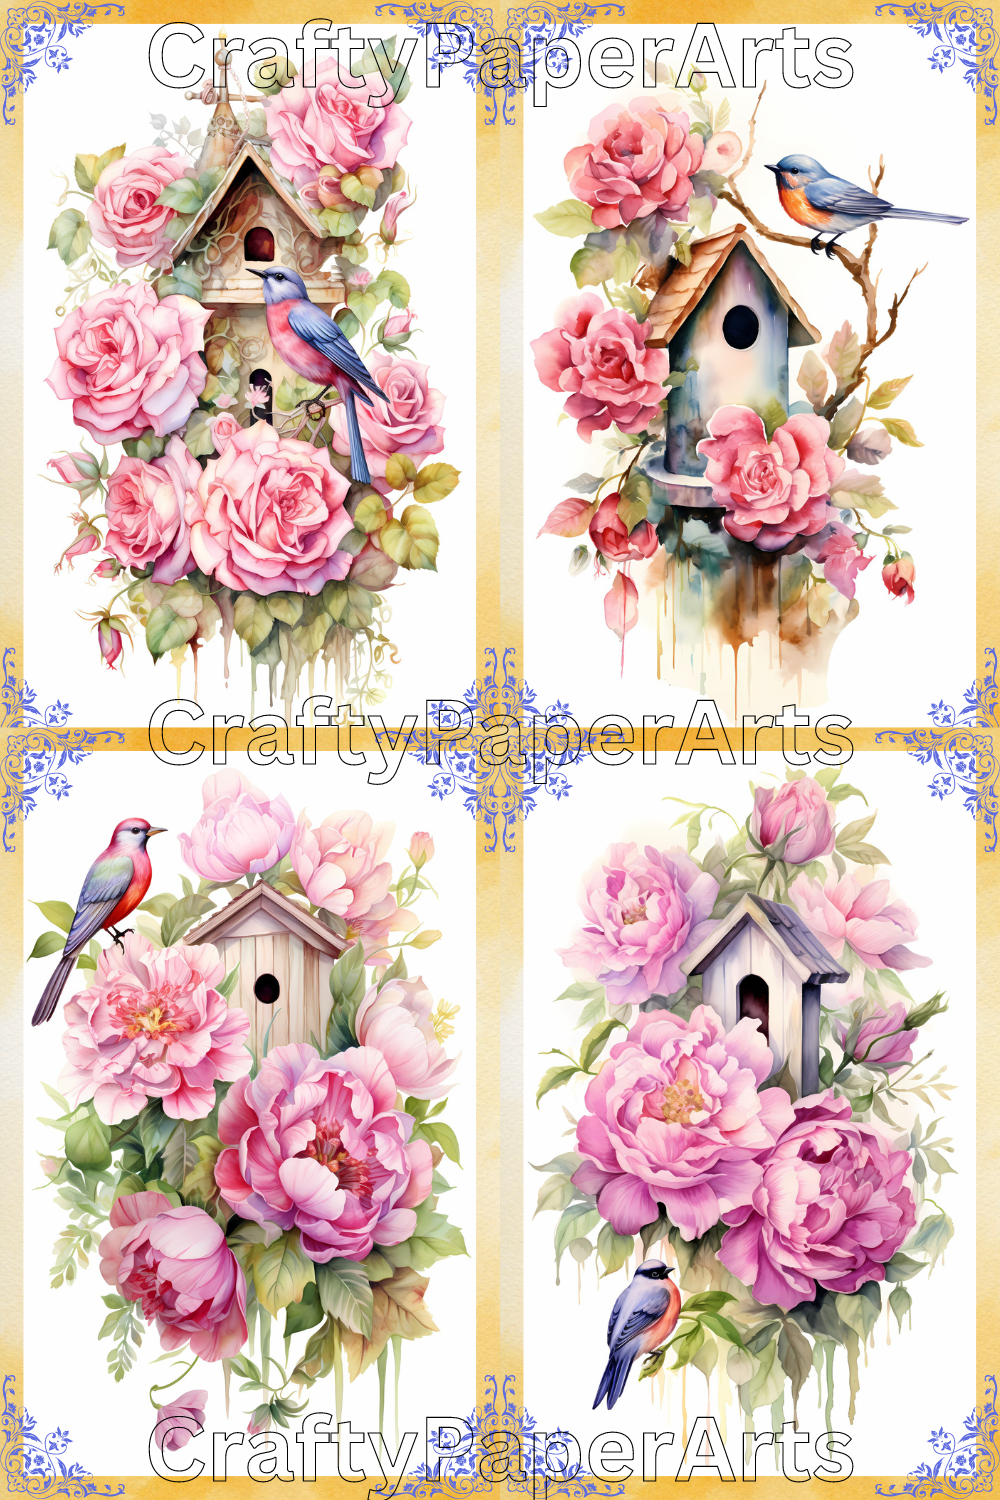 Bird Houses -Junk Journal Pages, Craft Supplies, Scrapbooking, Printable Journal Pages